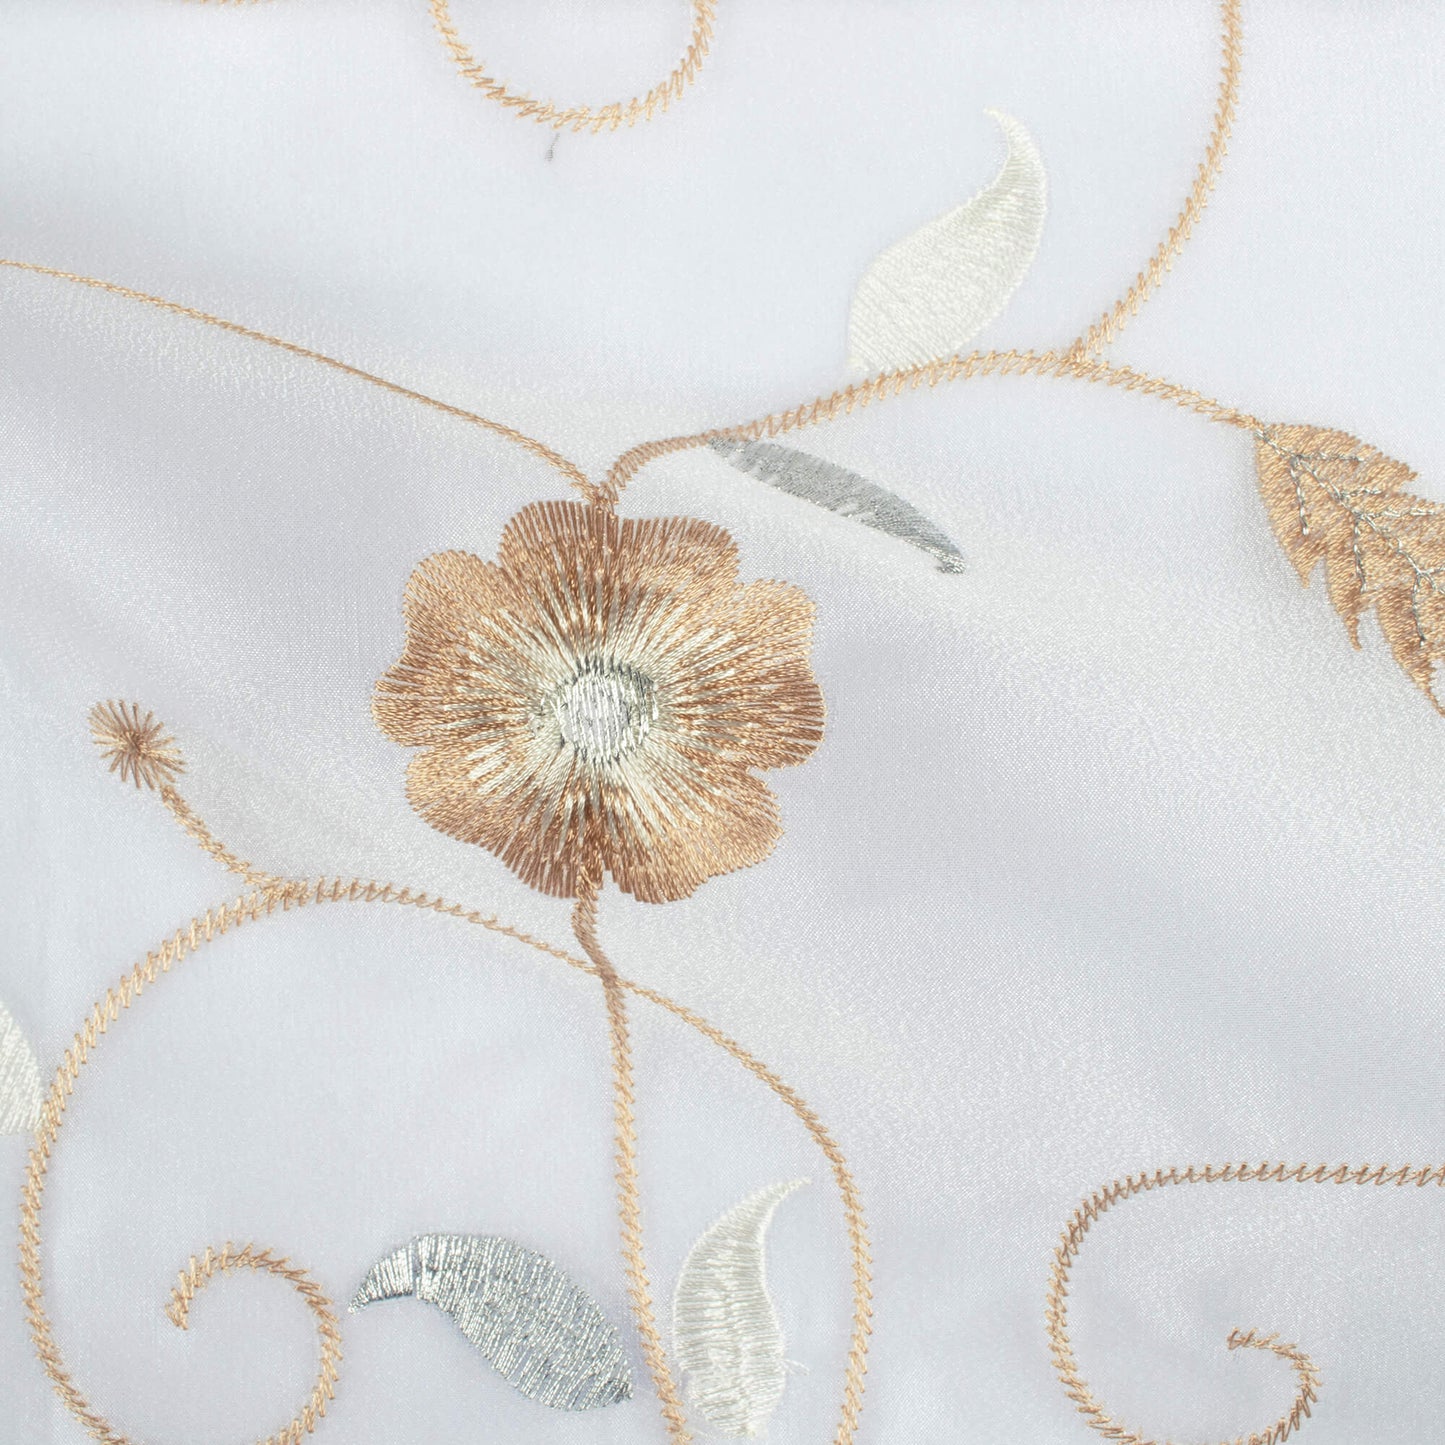 White And Tan Brown Floral Pattern Silver Zari Embroidery Organza Tissue Premium Sheer Fabric (Width 48 Inches)